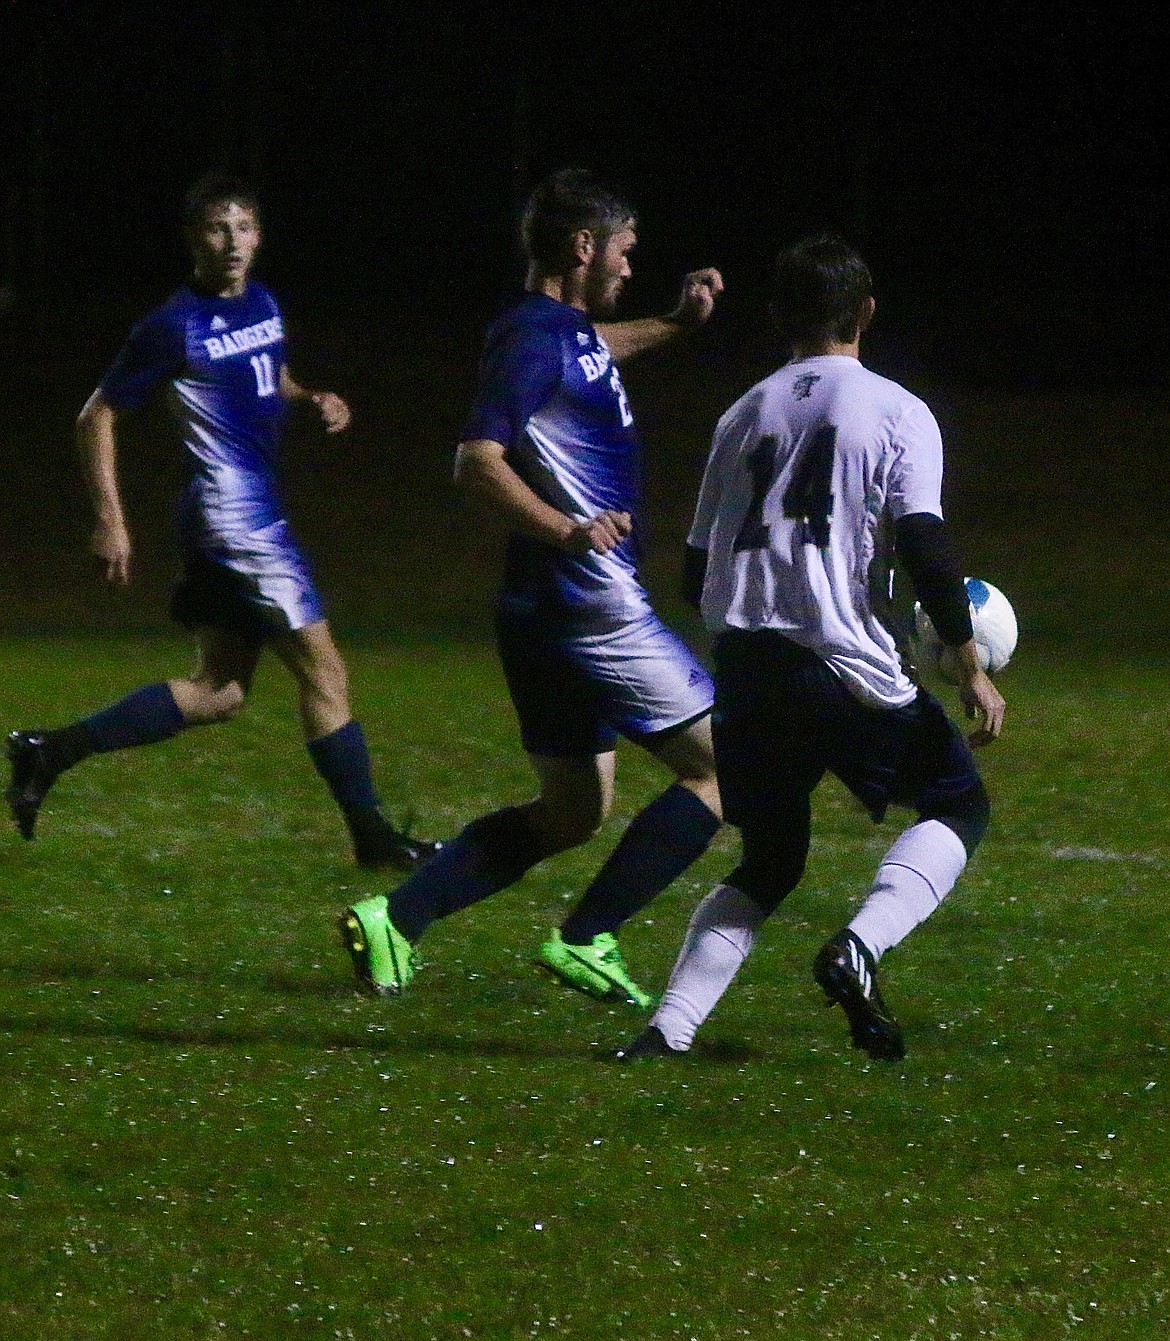 #27 Braeden Blackmore clears the ball from a Timberlake forward on Sept. 29.